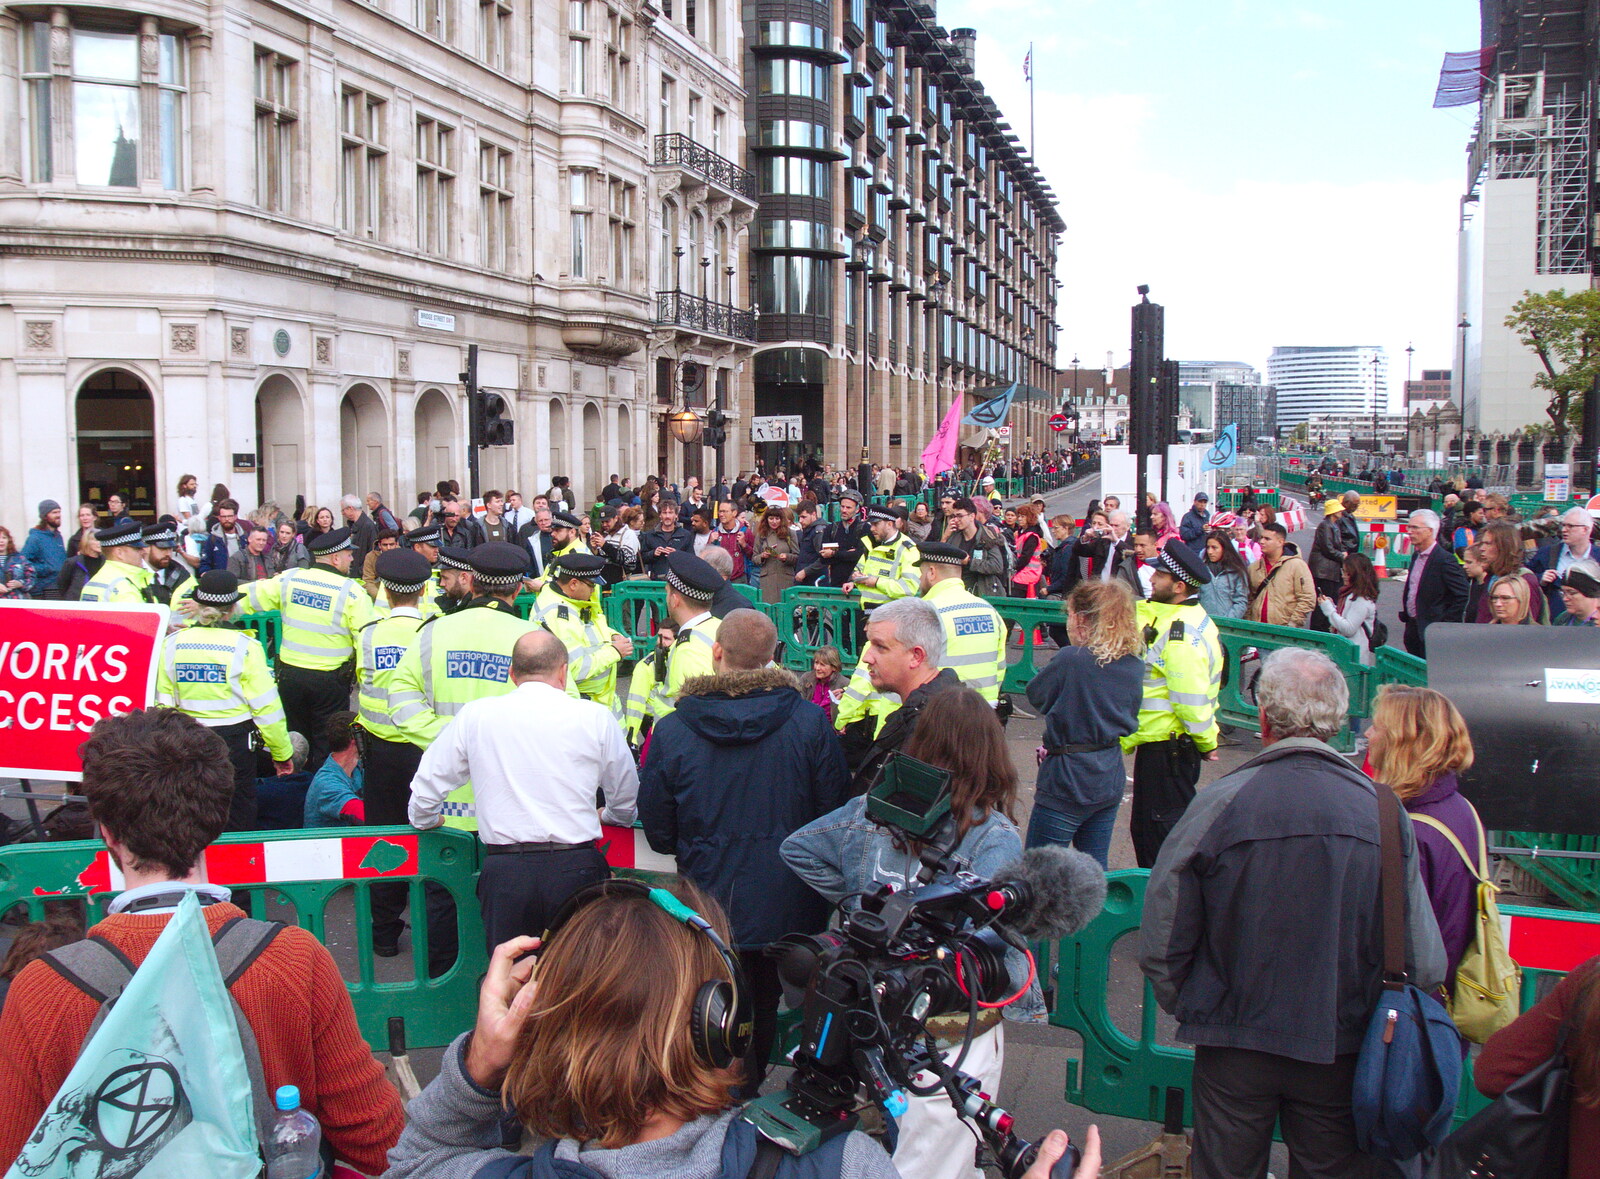 There's a mass of police in Parliament Square from The Extinction Rebellion Protest, Westminster, London - 9th October 2019